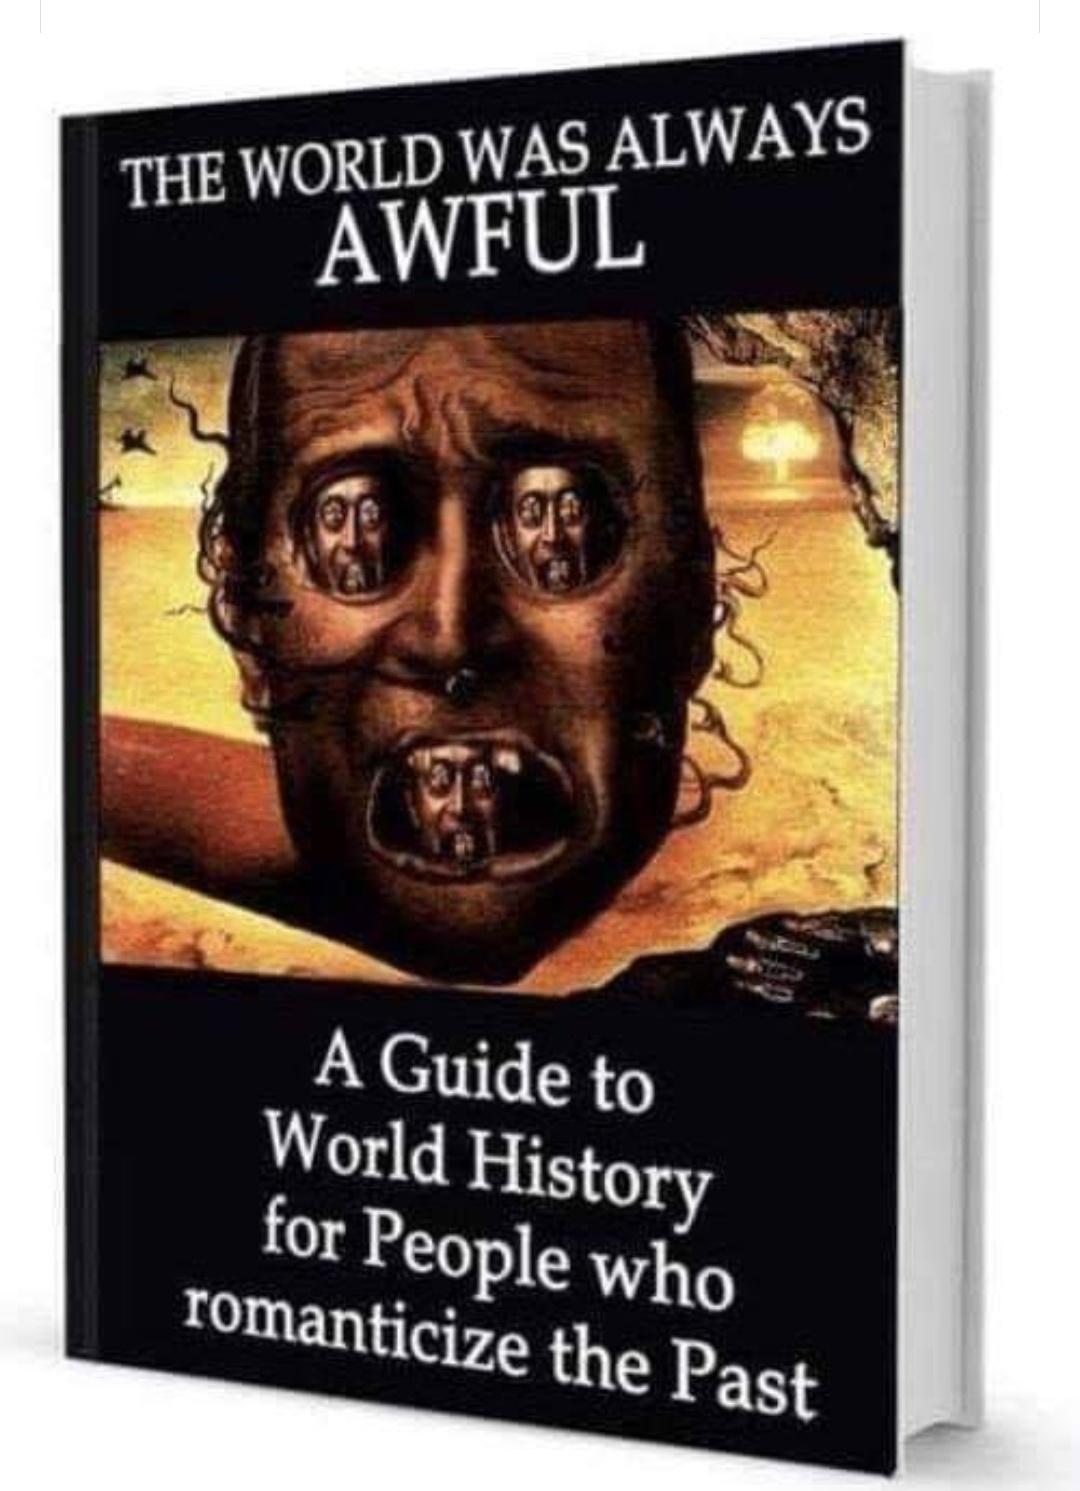 The World Was Always Awful A Guide to World History for People who romanticize the Past